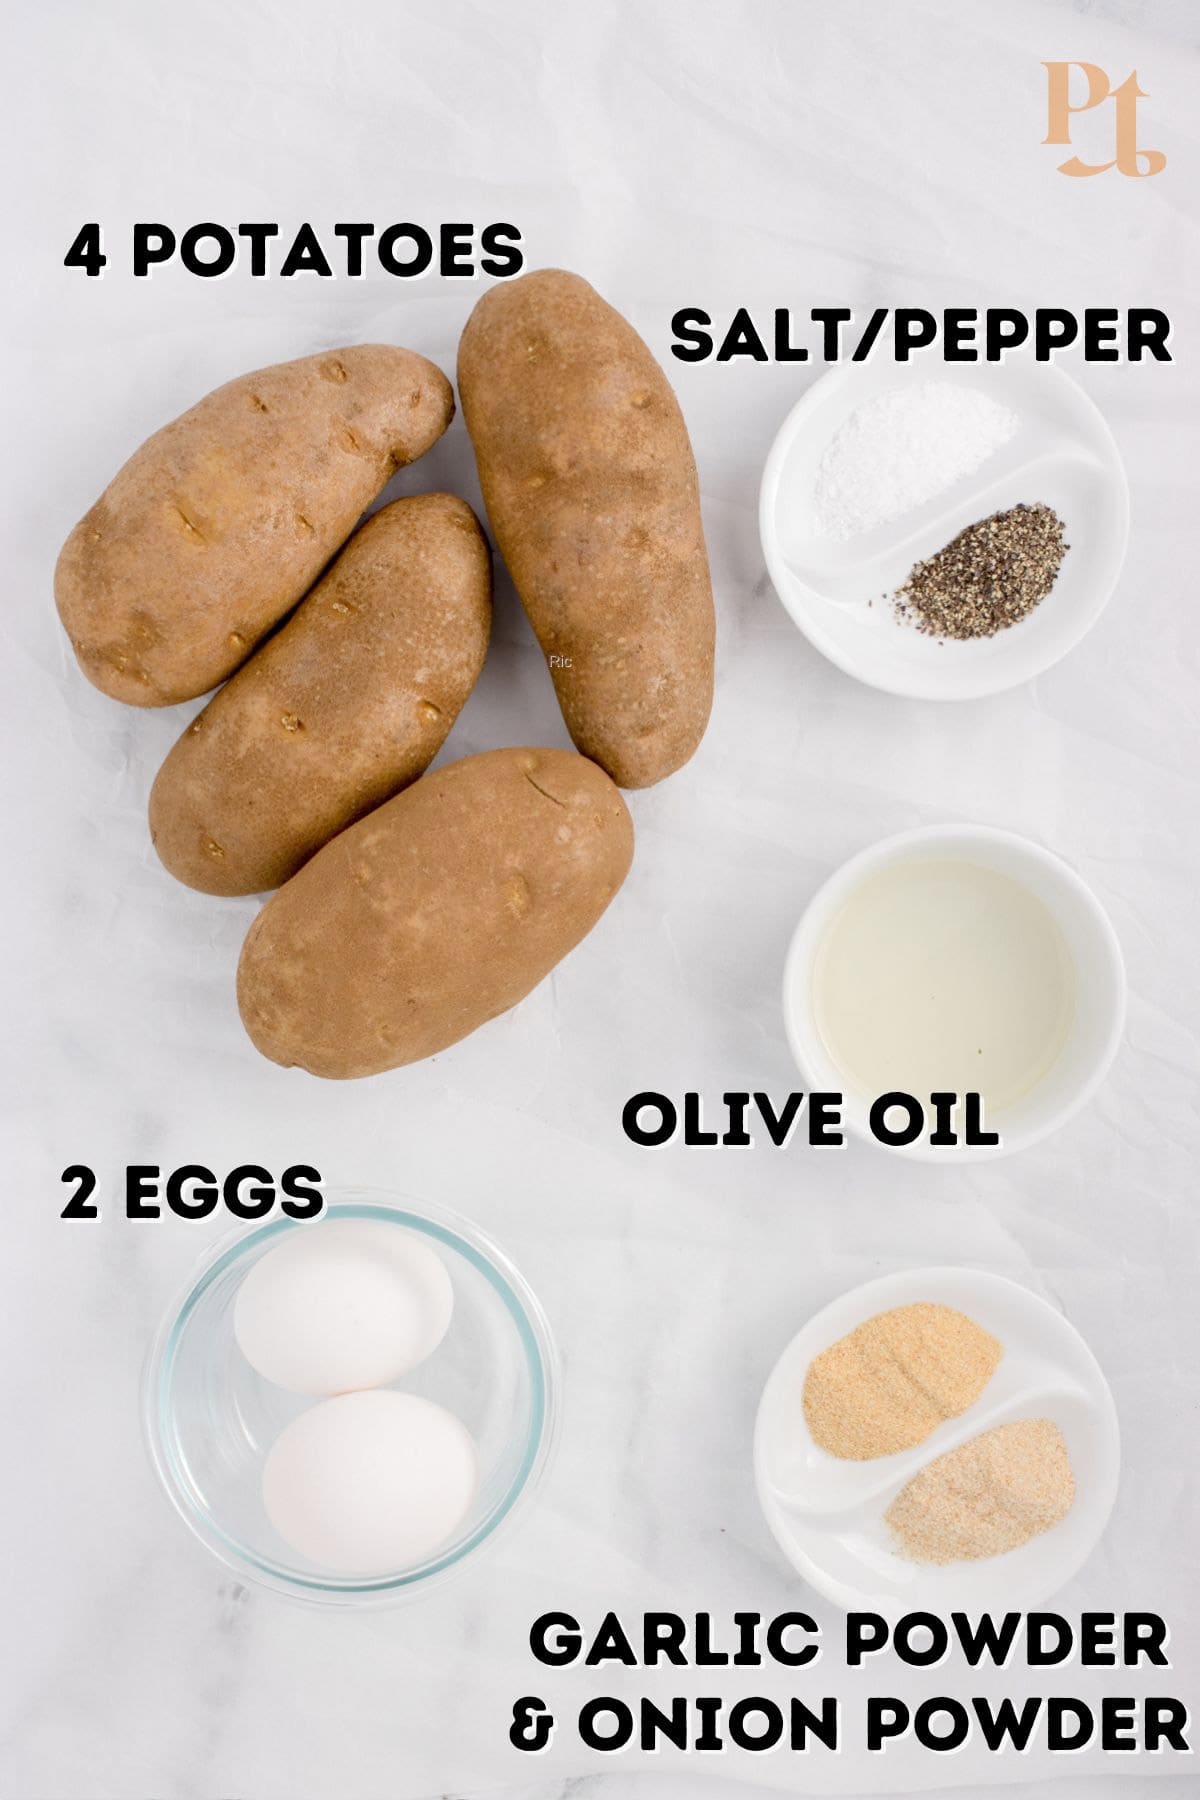 Some potatoes and other ingredients for making air fryer hash browns.